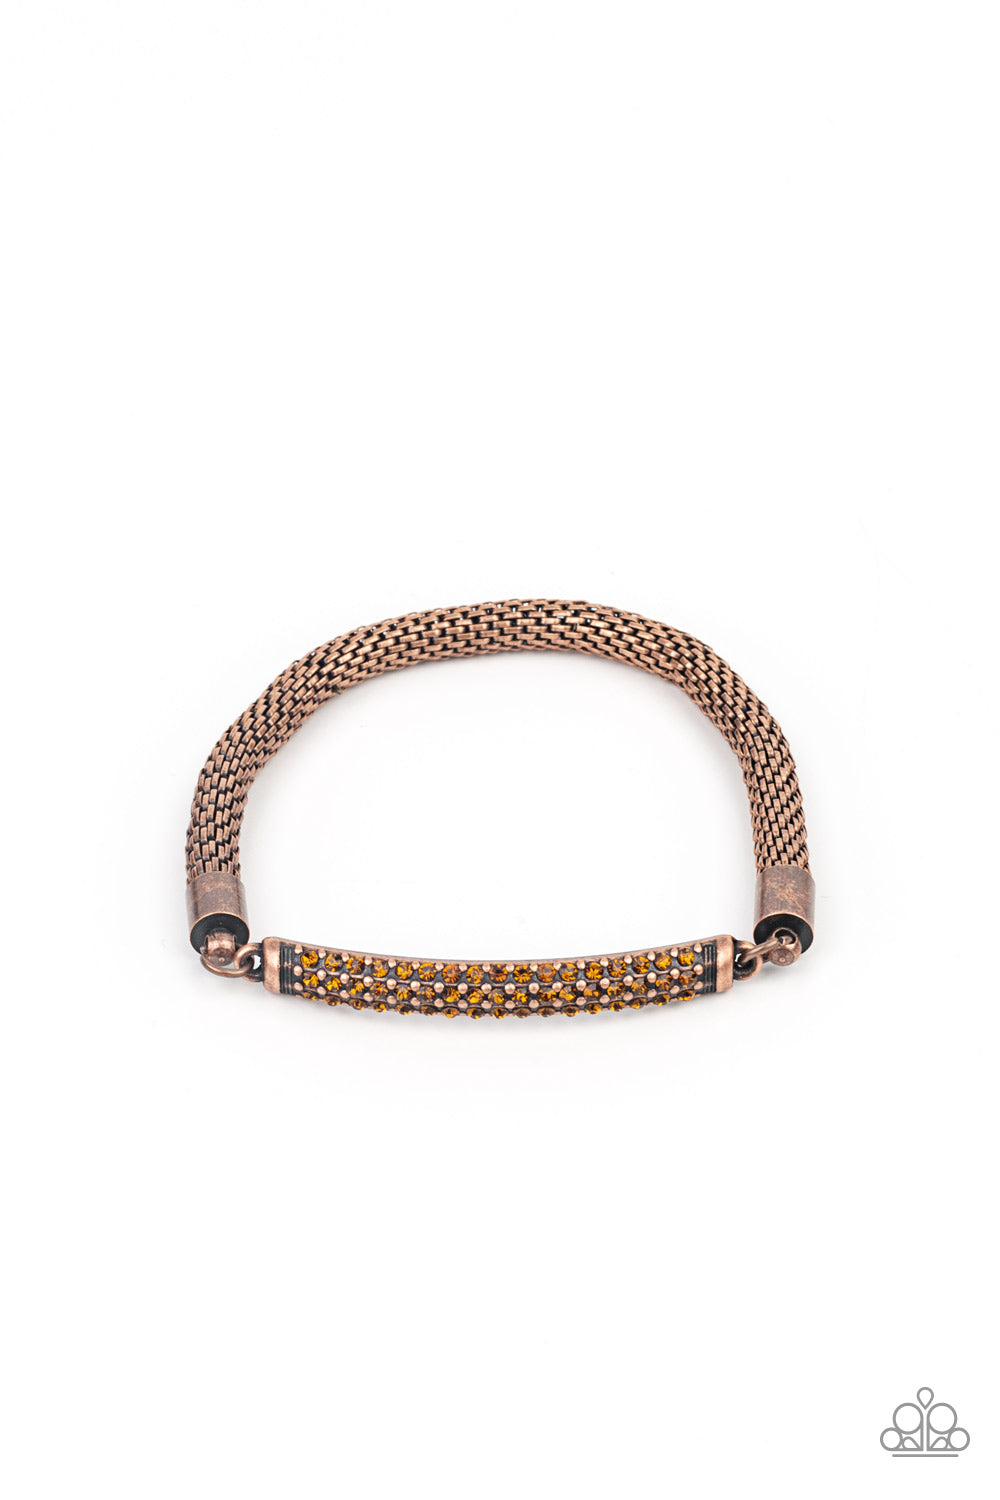 stretchy band, a gritty strand of rounded copper mesh chain links with a smoldering copper plate encrusted in rows of dainty topaz rhinestones